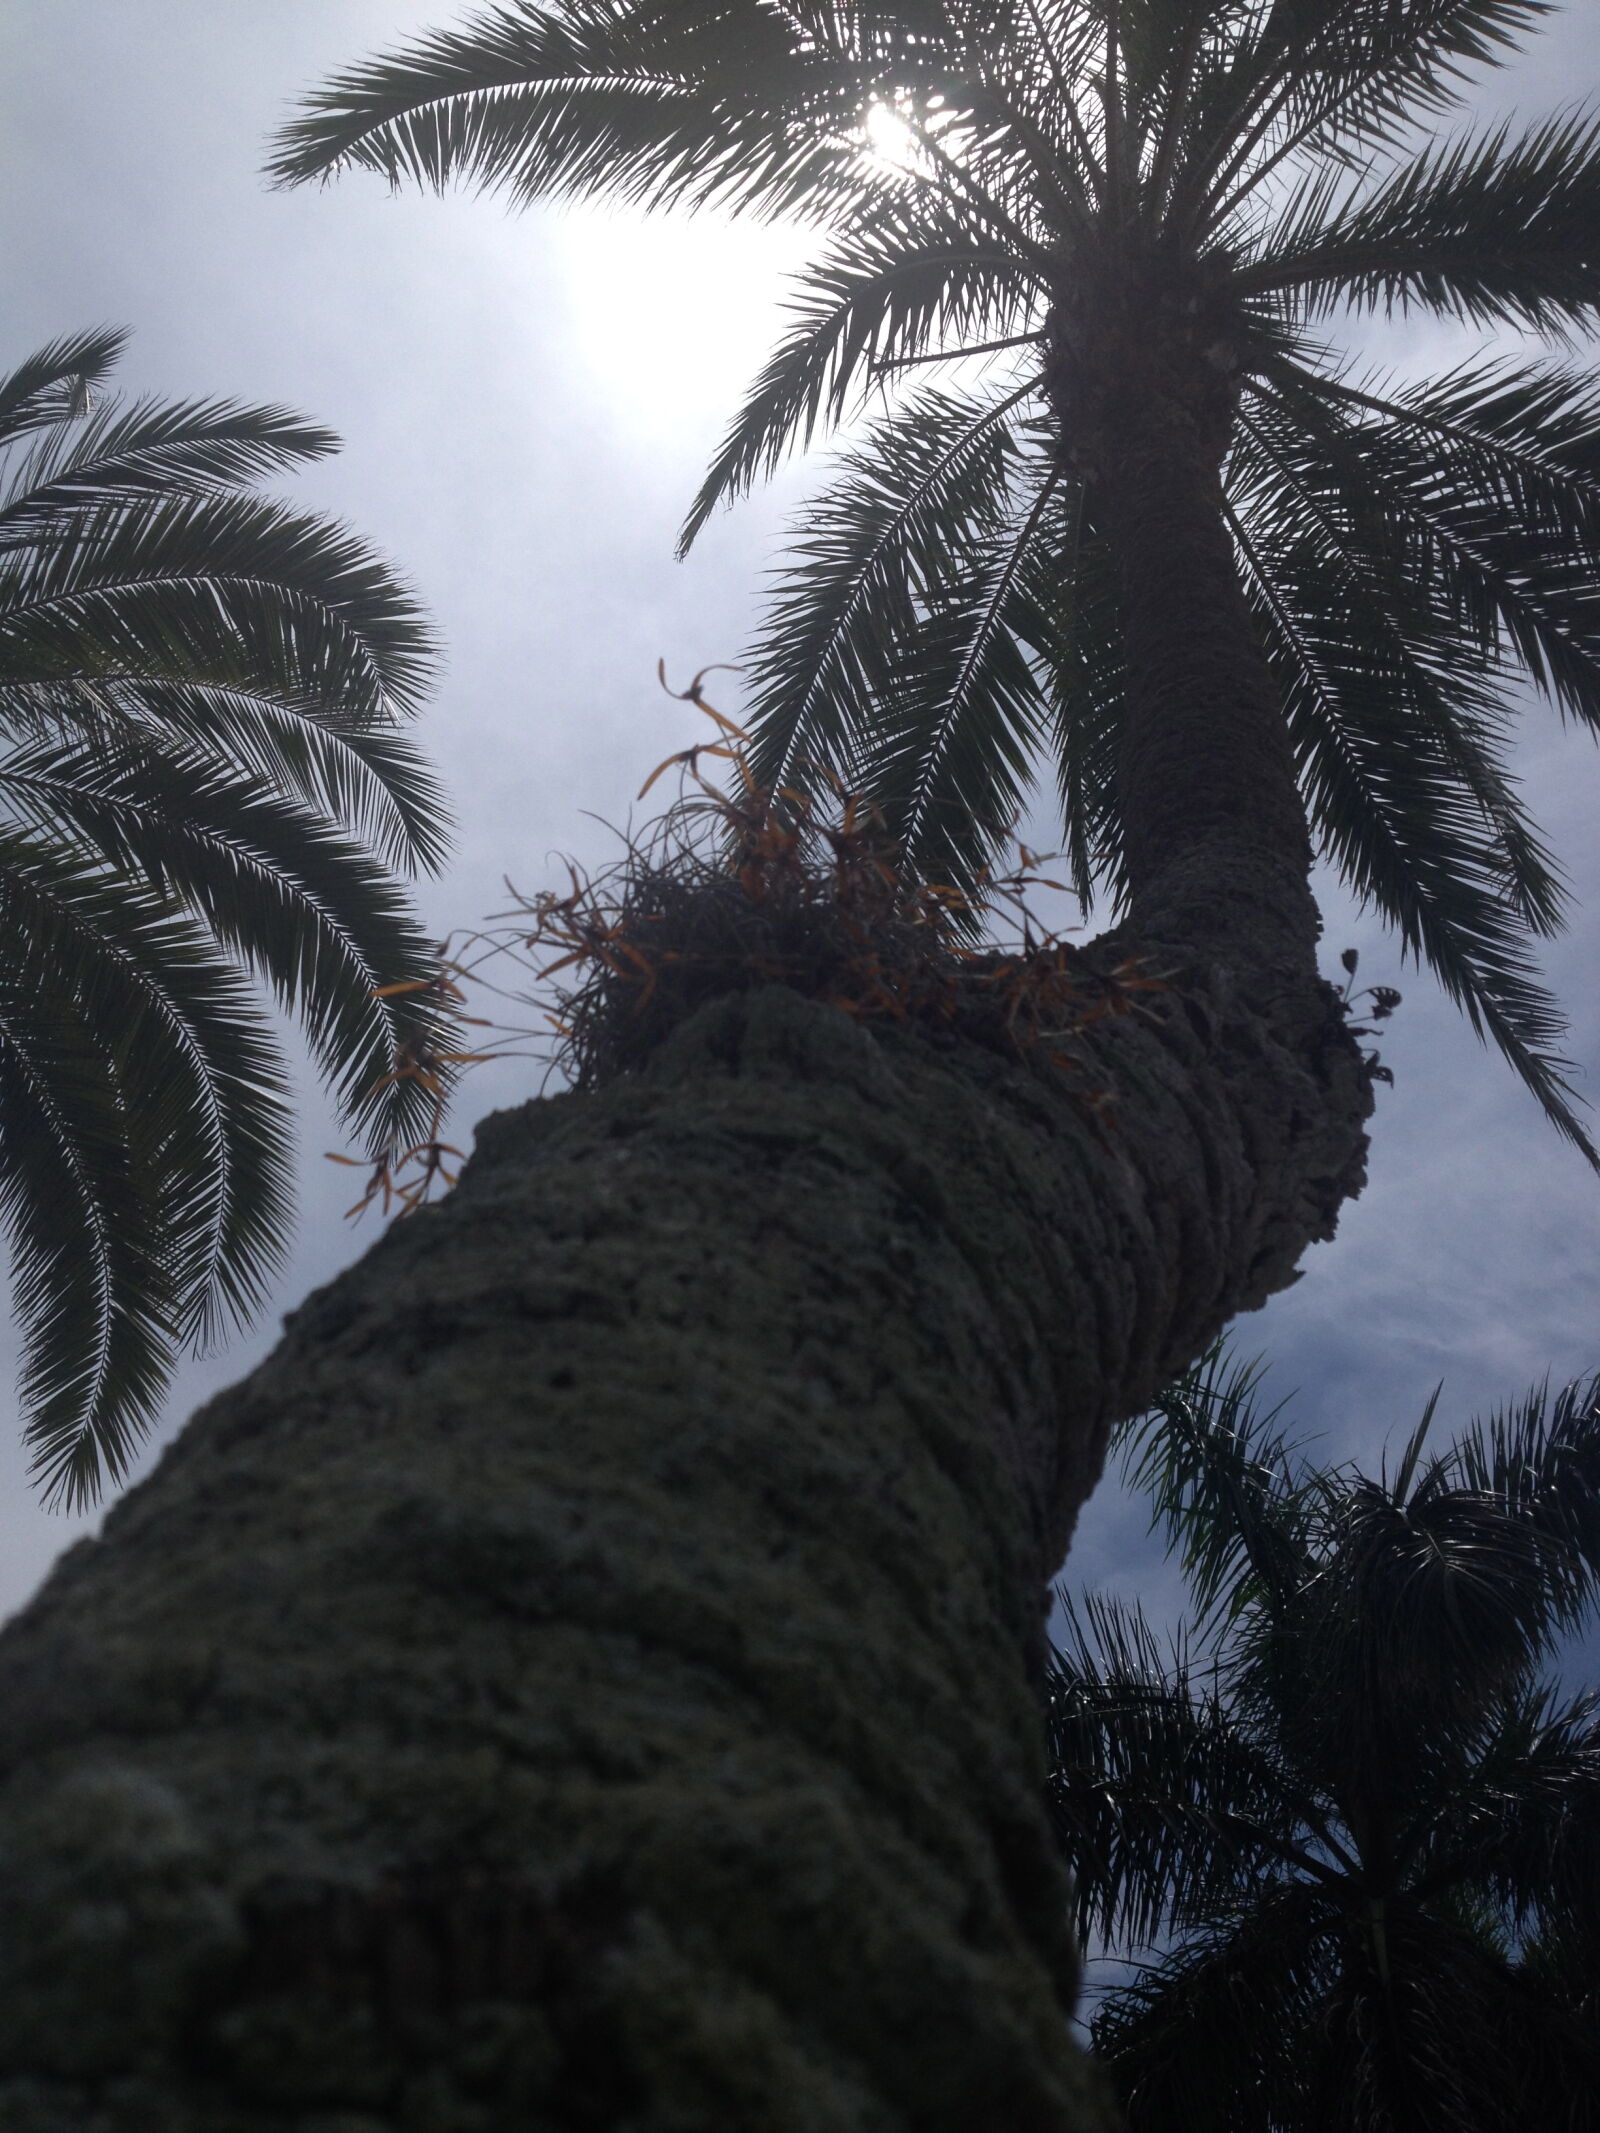 Apple iPhone 4S sample photo. Nature, palm, tree, palm photography